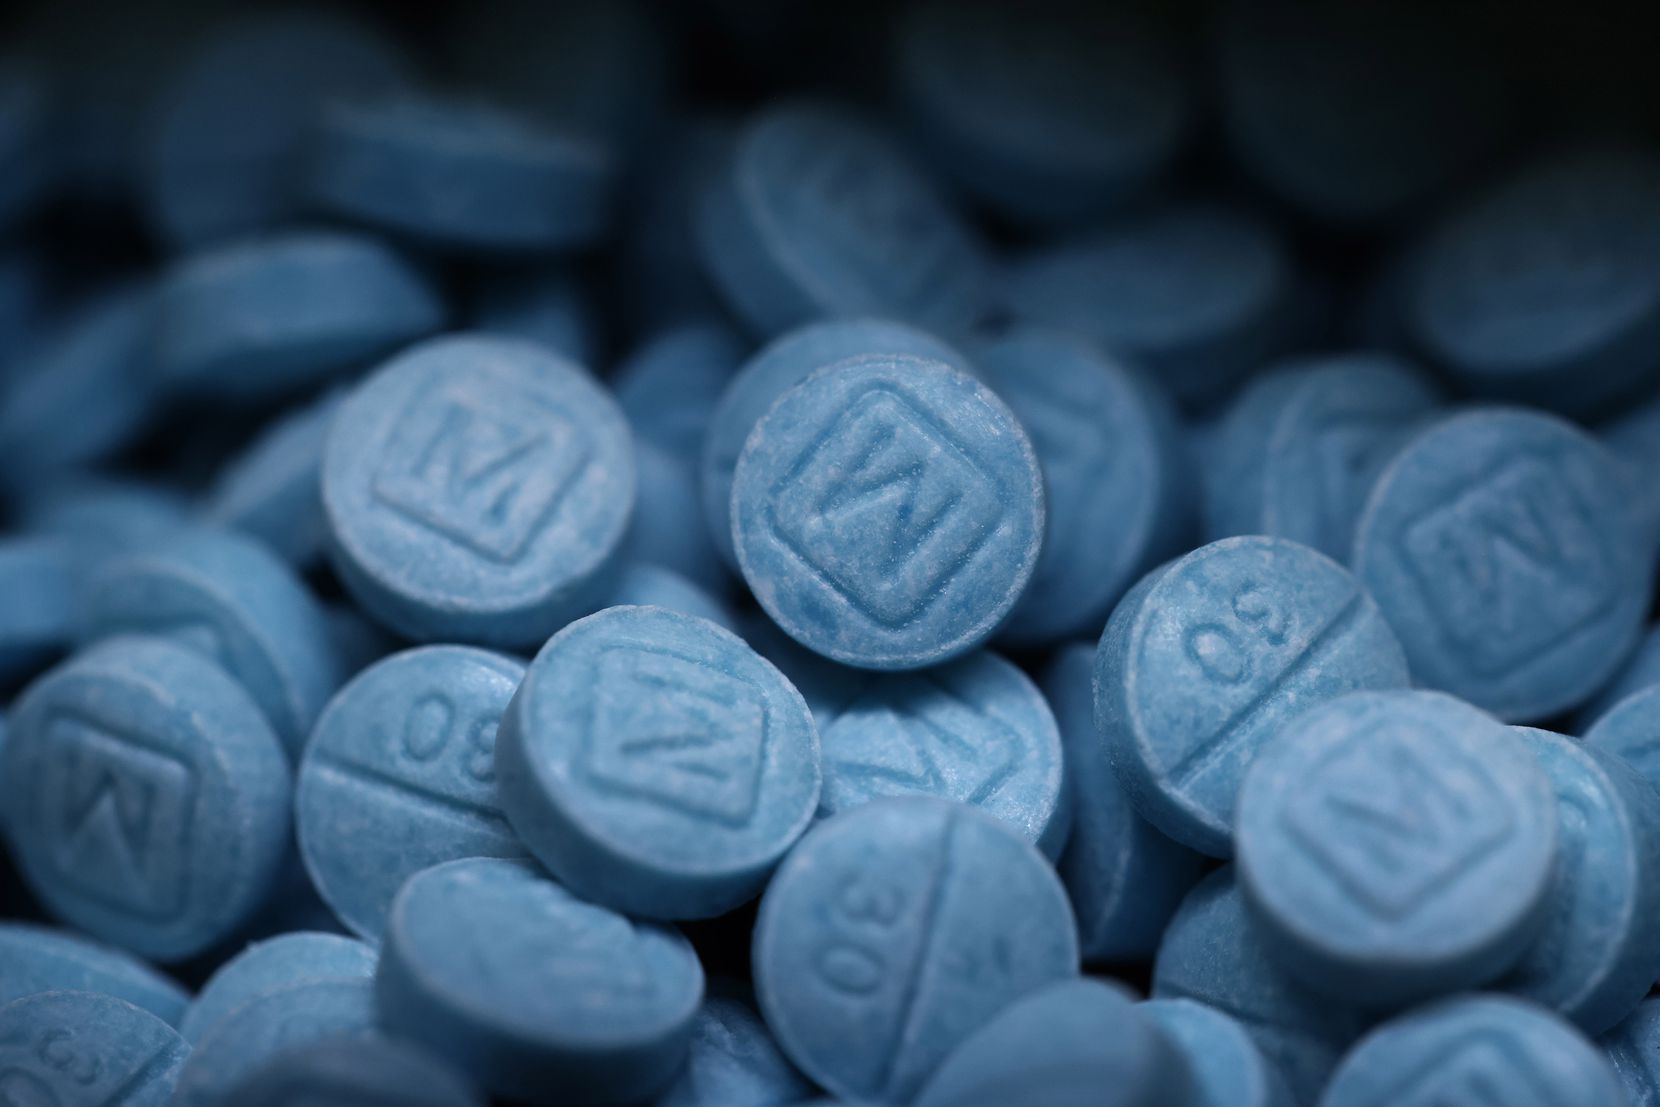 Fentanyl poisoning & counterfeit pills - Partnership to End Addiction